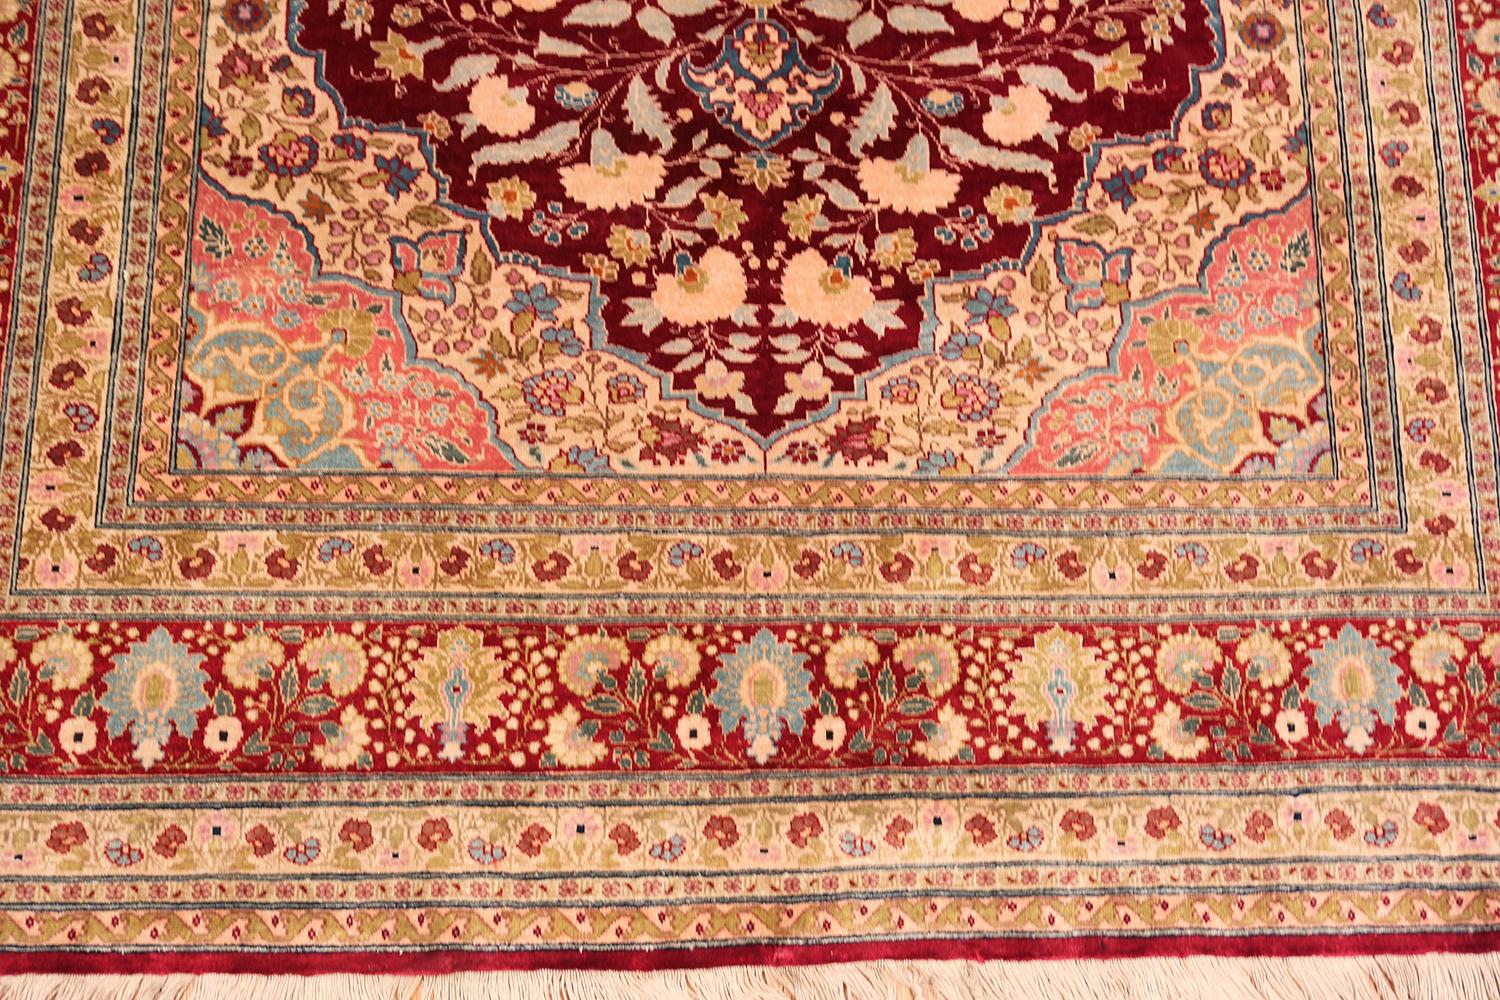 Breathtaking Antique Persian Silk Tabriz Carpet, Country of Origin / Rug Type: Persian Rugs, Circa Date: 1900 - Size: 4 ft 2 in x 5 ft 7 in (1.27 m x 1.7 m). 